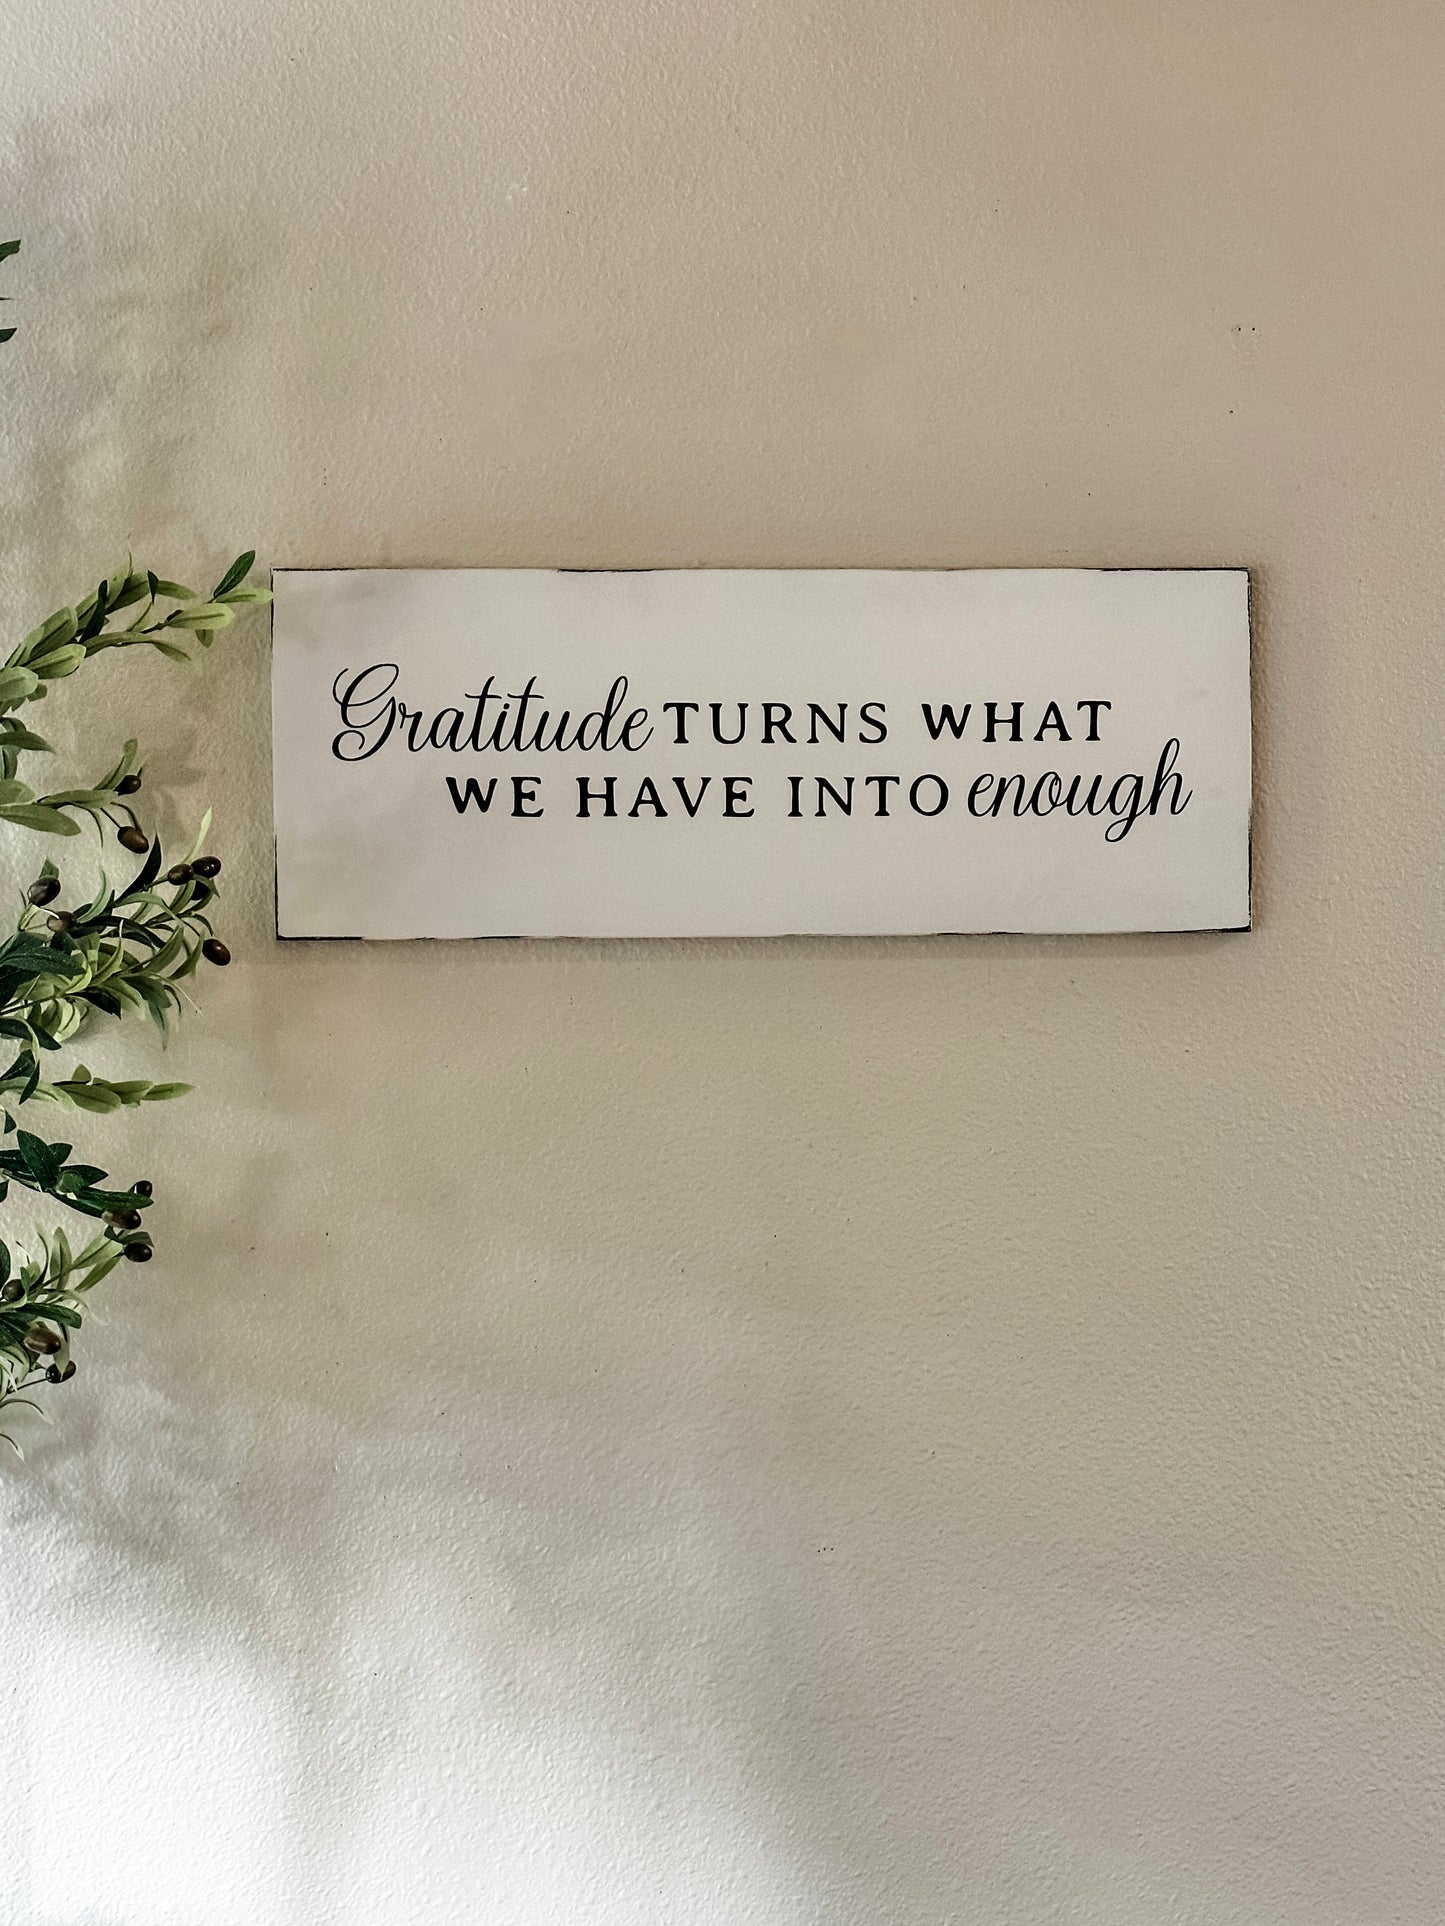 Gratitude turns what we have into enough walk sign